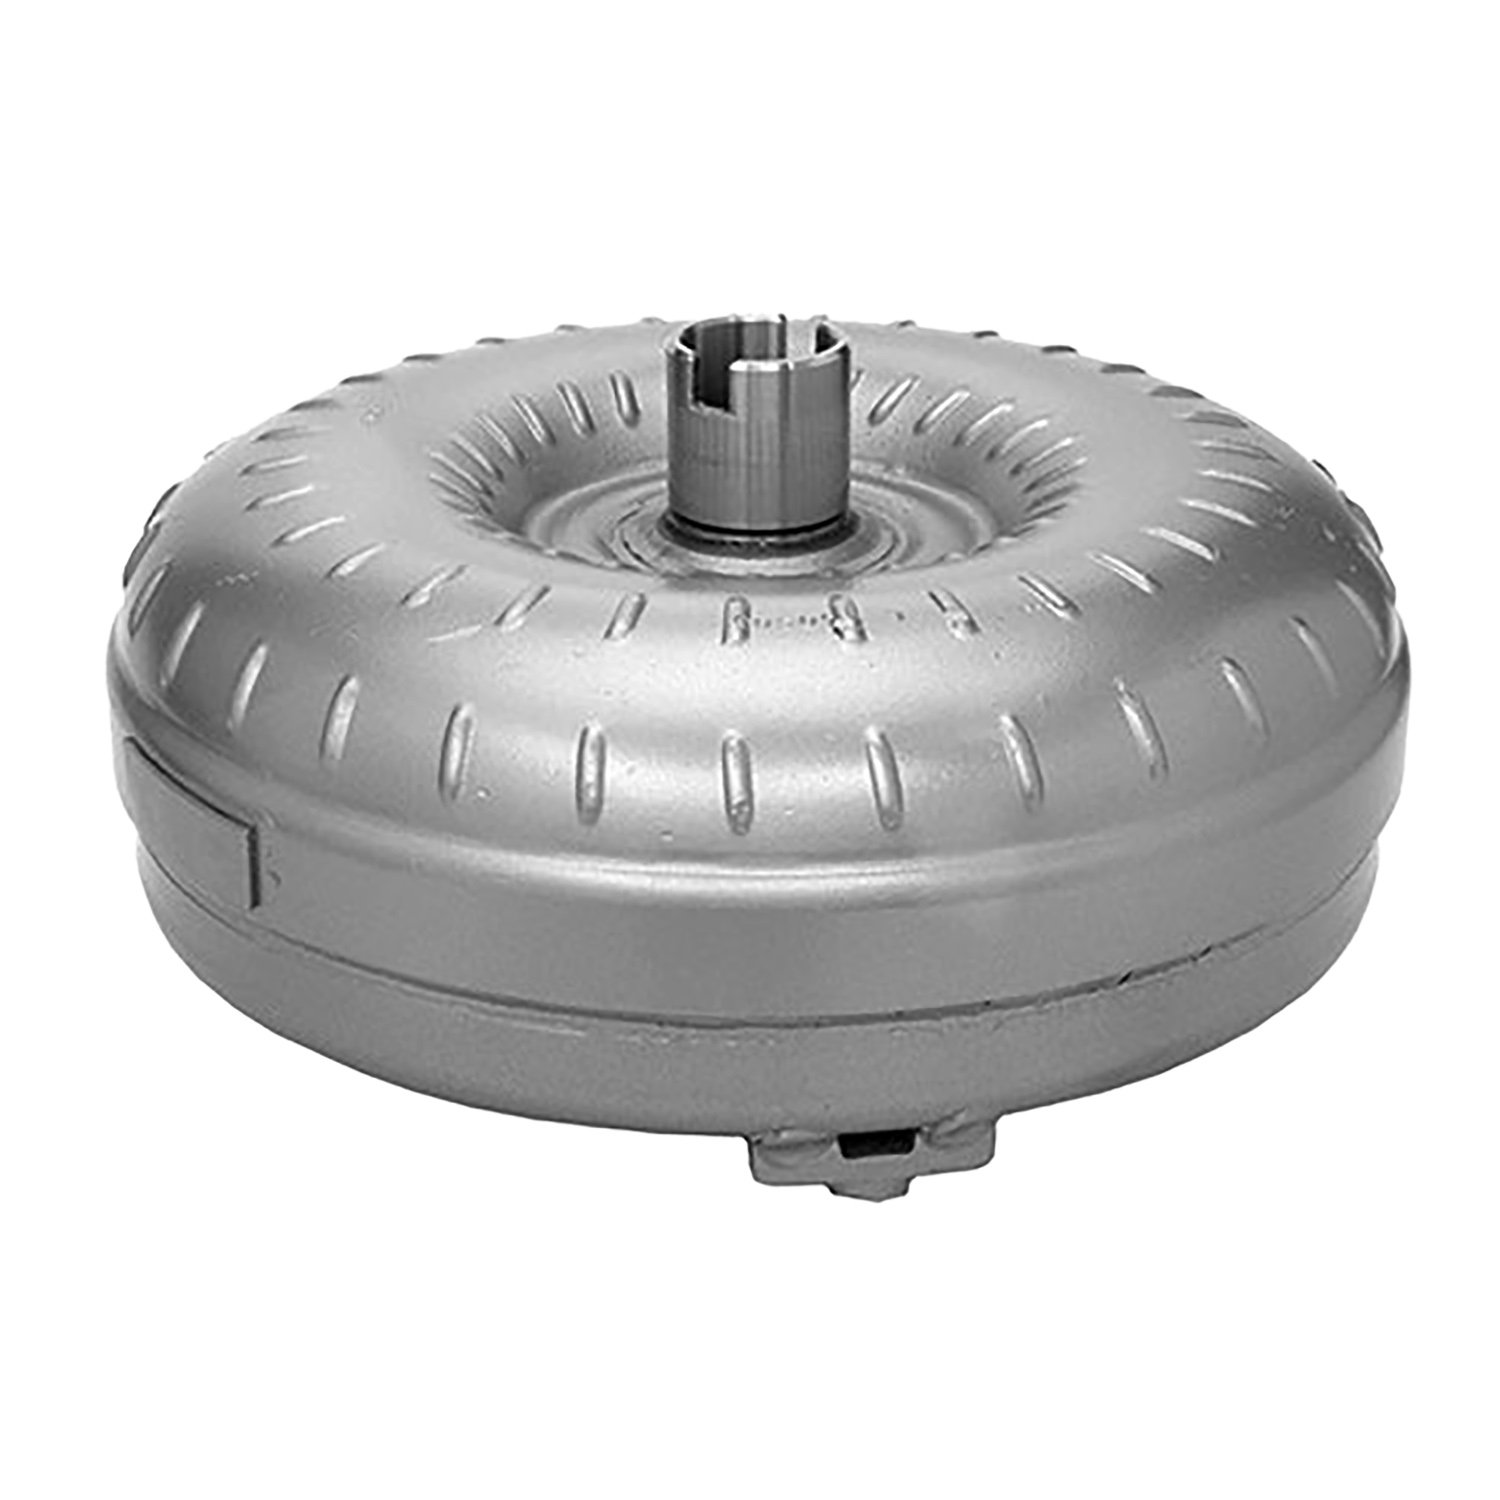 Remanufactured Automatic Transmission Torque Converter for GM TH200/325, 700 80-90